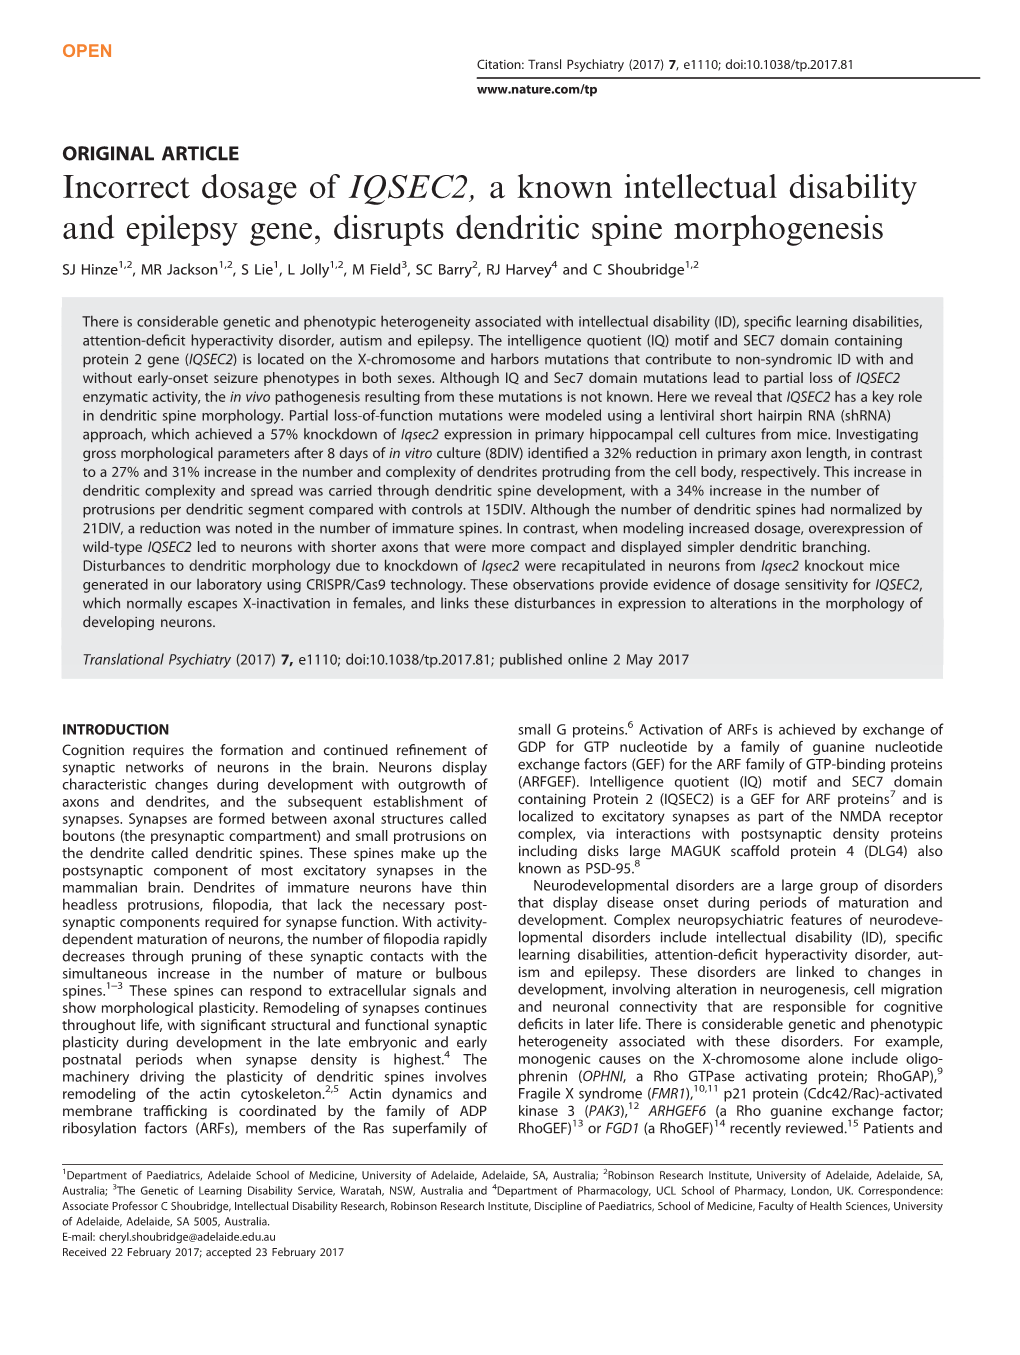 Incorrect Dosage of IQSEC2, a Known Intellectual Disability and Epilepsy Gene, Disrupts Dendritic Spine Morphogenesis